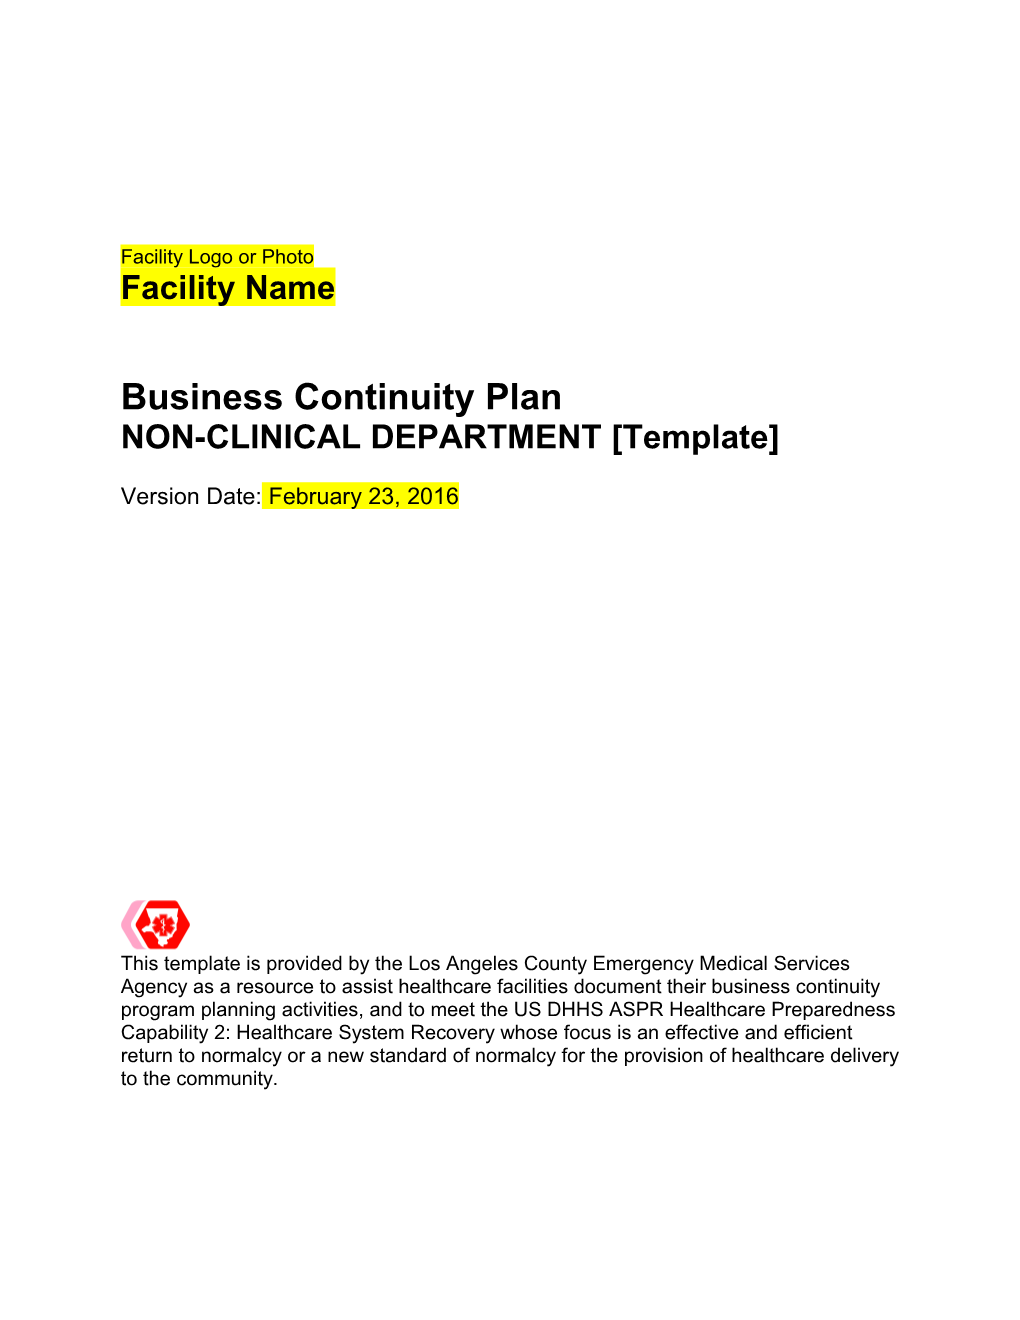 Business Continuity Plan: Non-Clinical Department